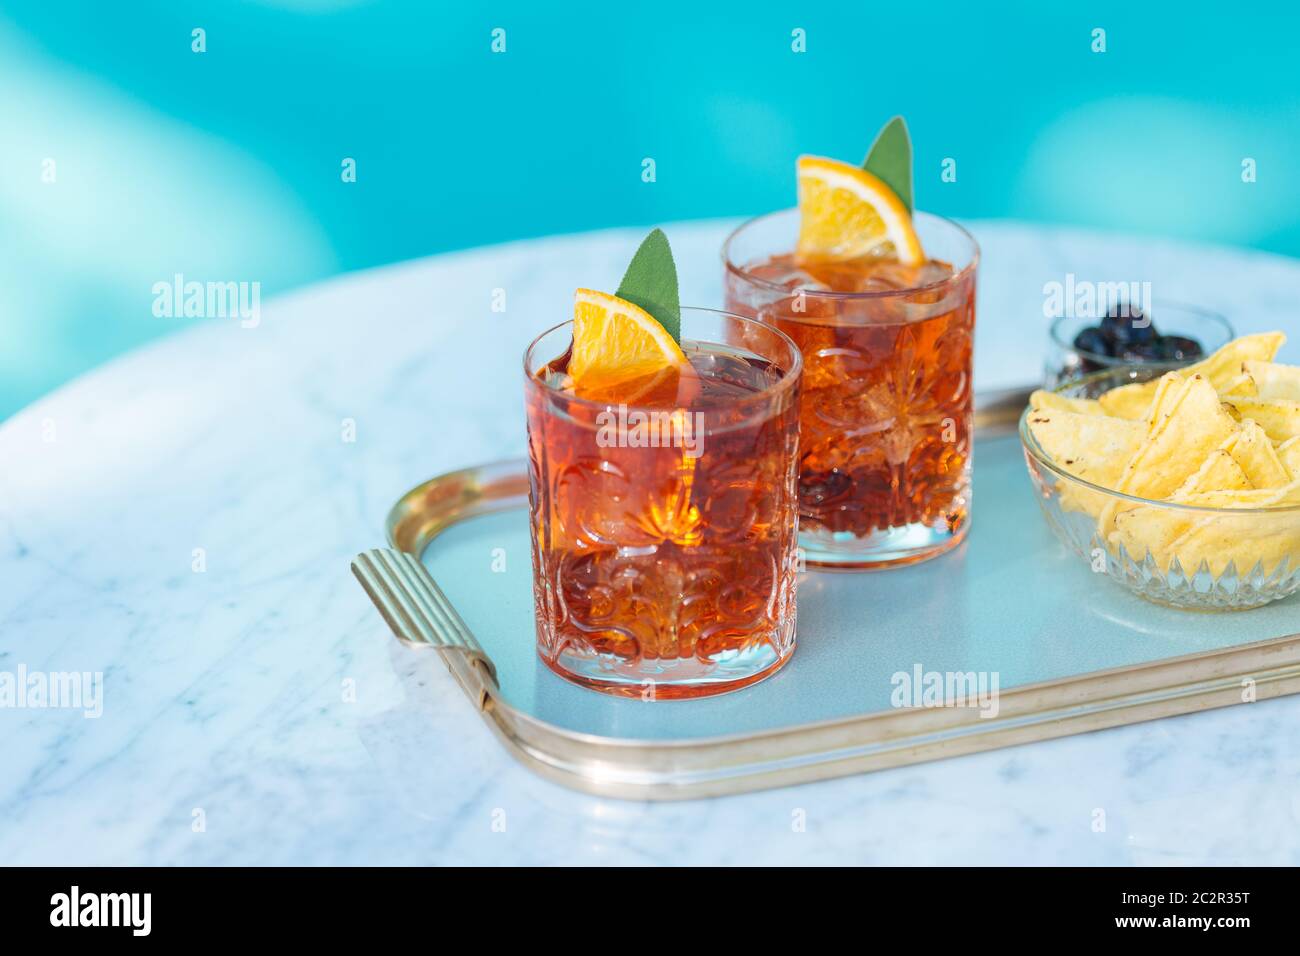 Negroni, an italian cocktail, an apéritif, first mixed in Firenze, Italy, in 1919. Count Camillo Negroni asked to strengthen his Americano Stock Photo